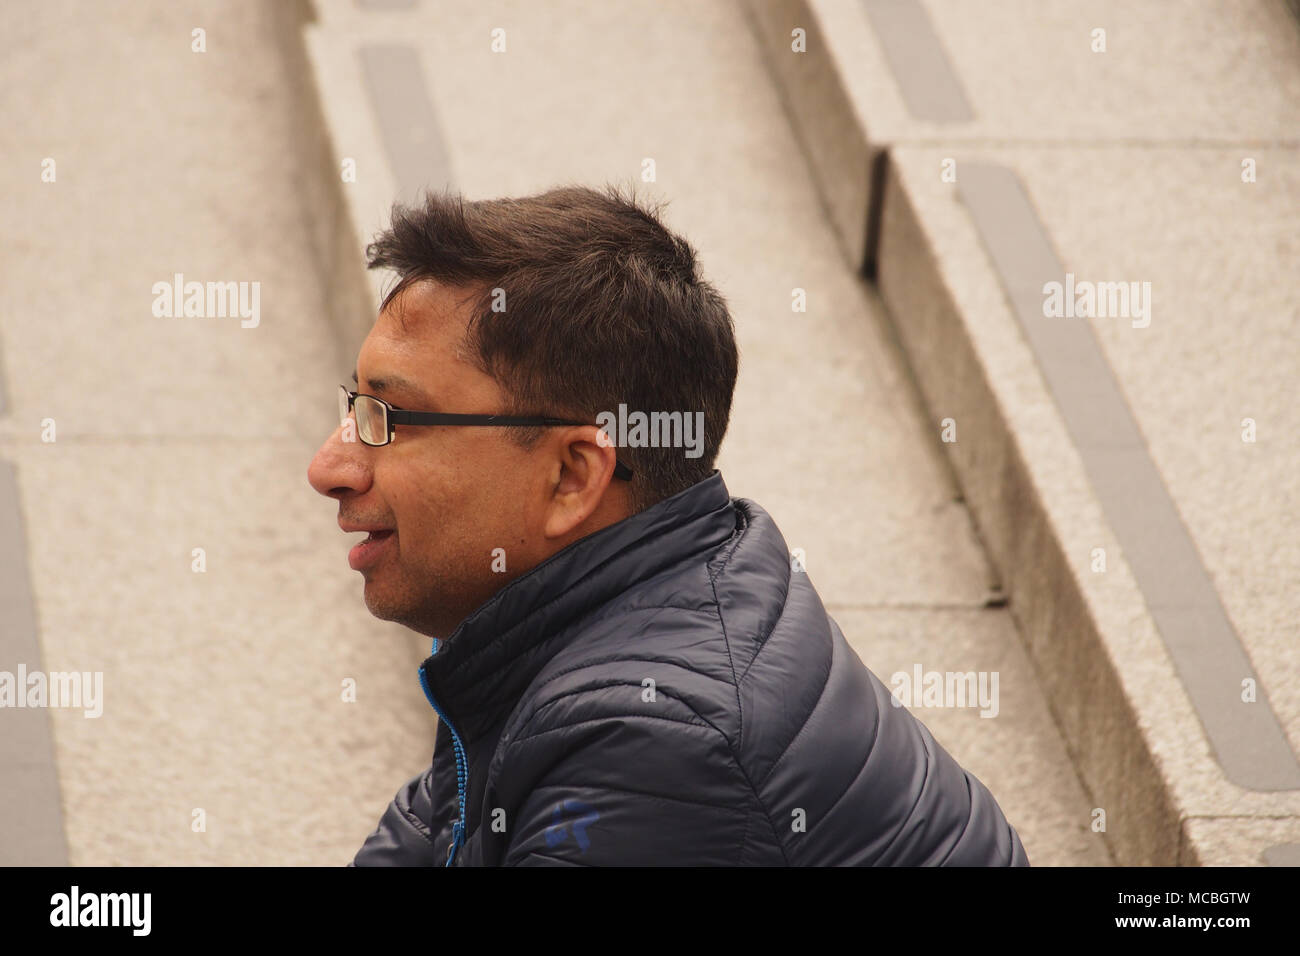 A young man sitting on the stone steps in Trafalgar, London watching the world go by wearing a thick coat and glasses Stock Photo